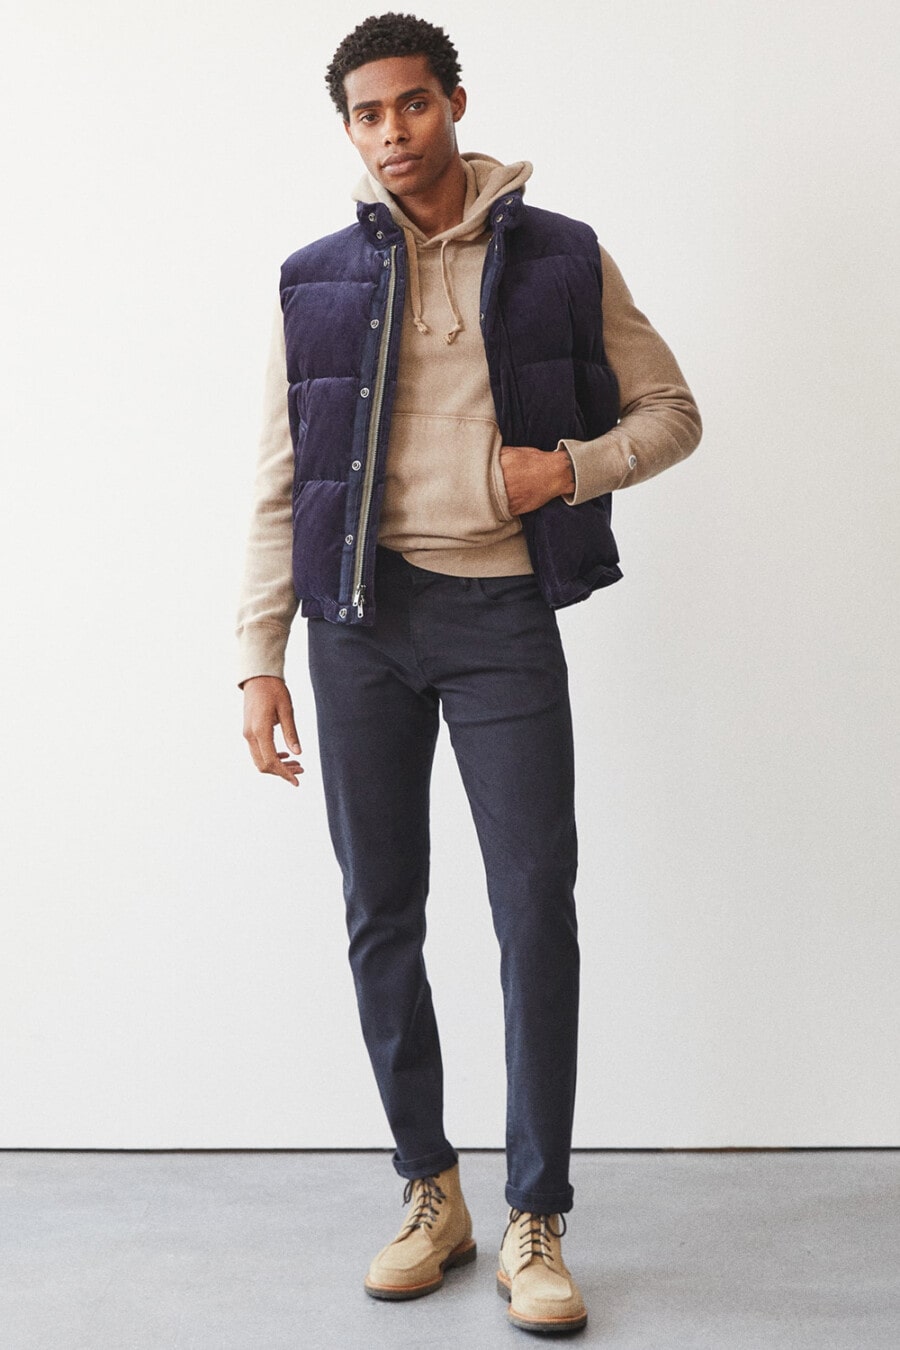 Men's navy pants, light brown hoodie, navy textured puffer vest and beige suede boots outfit